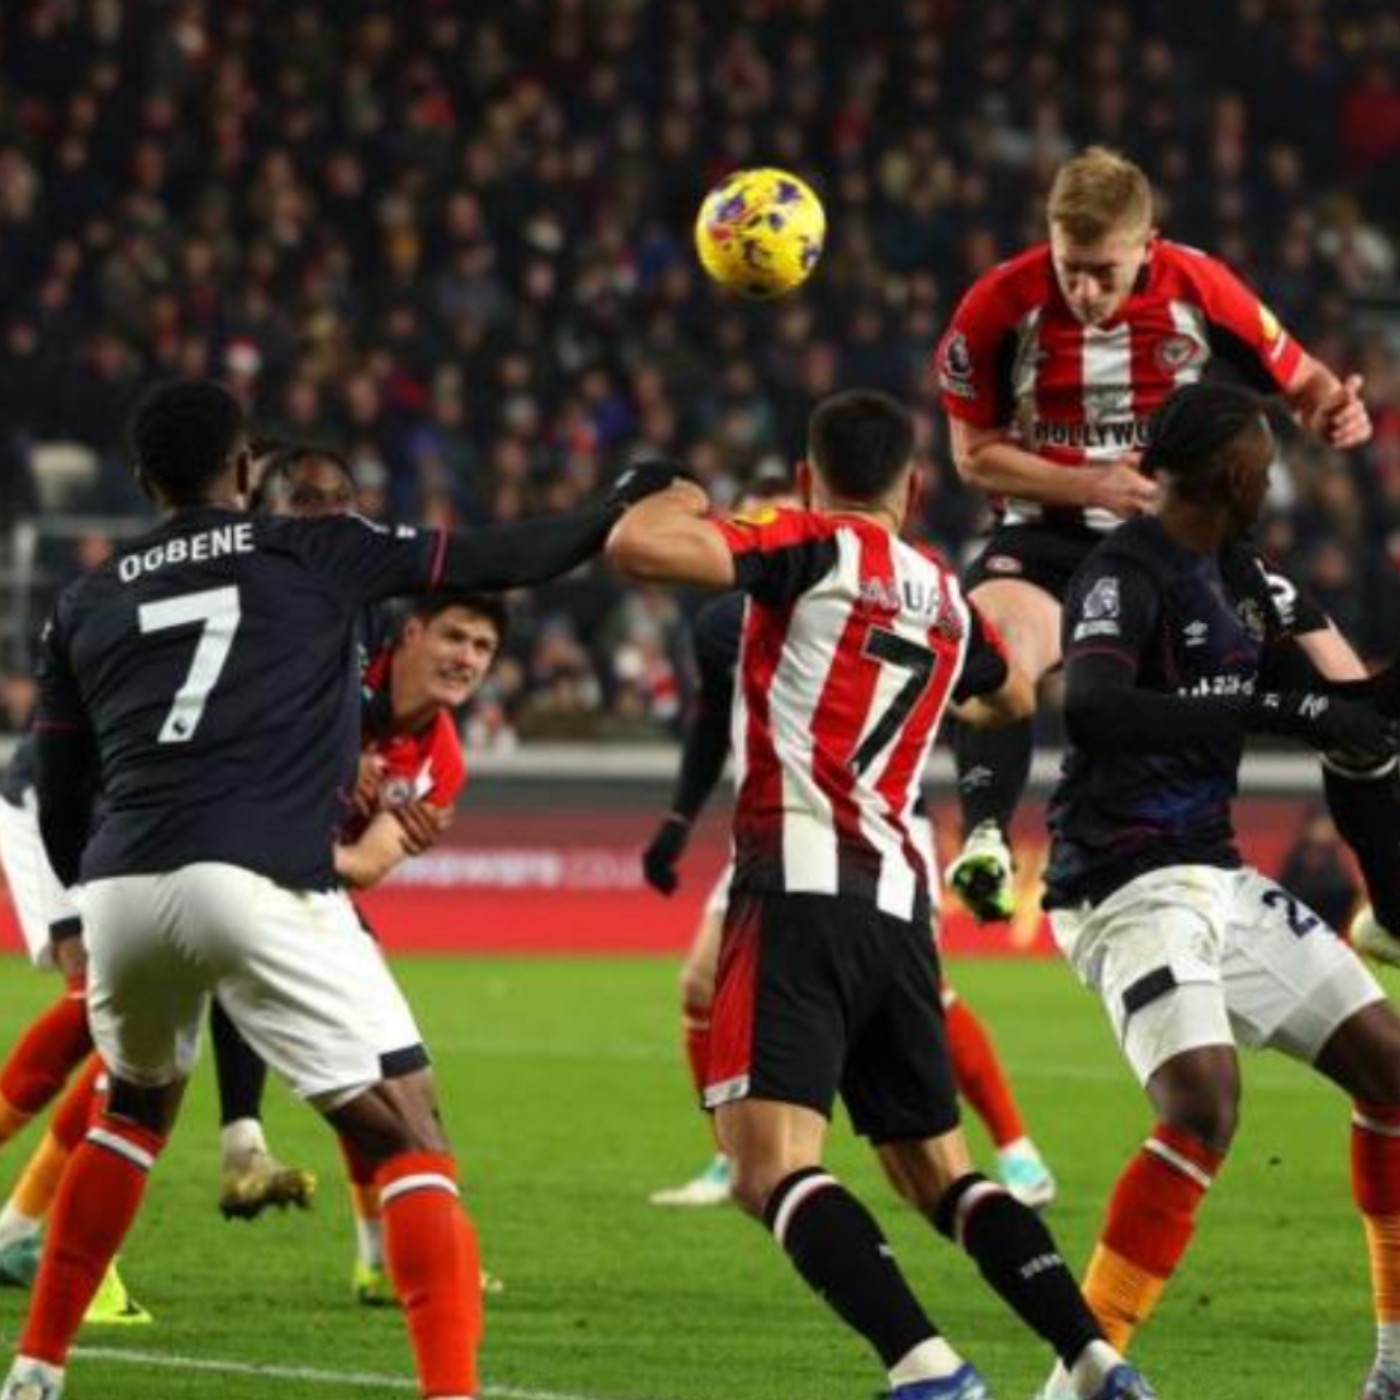 Bees Bounce from Bedfordshire to Benfica - Luton v Brentford Preview Podcast